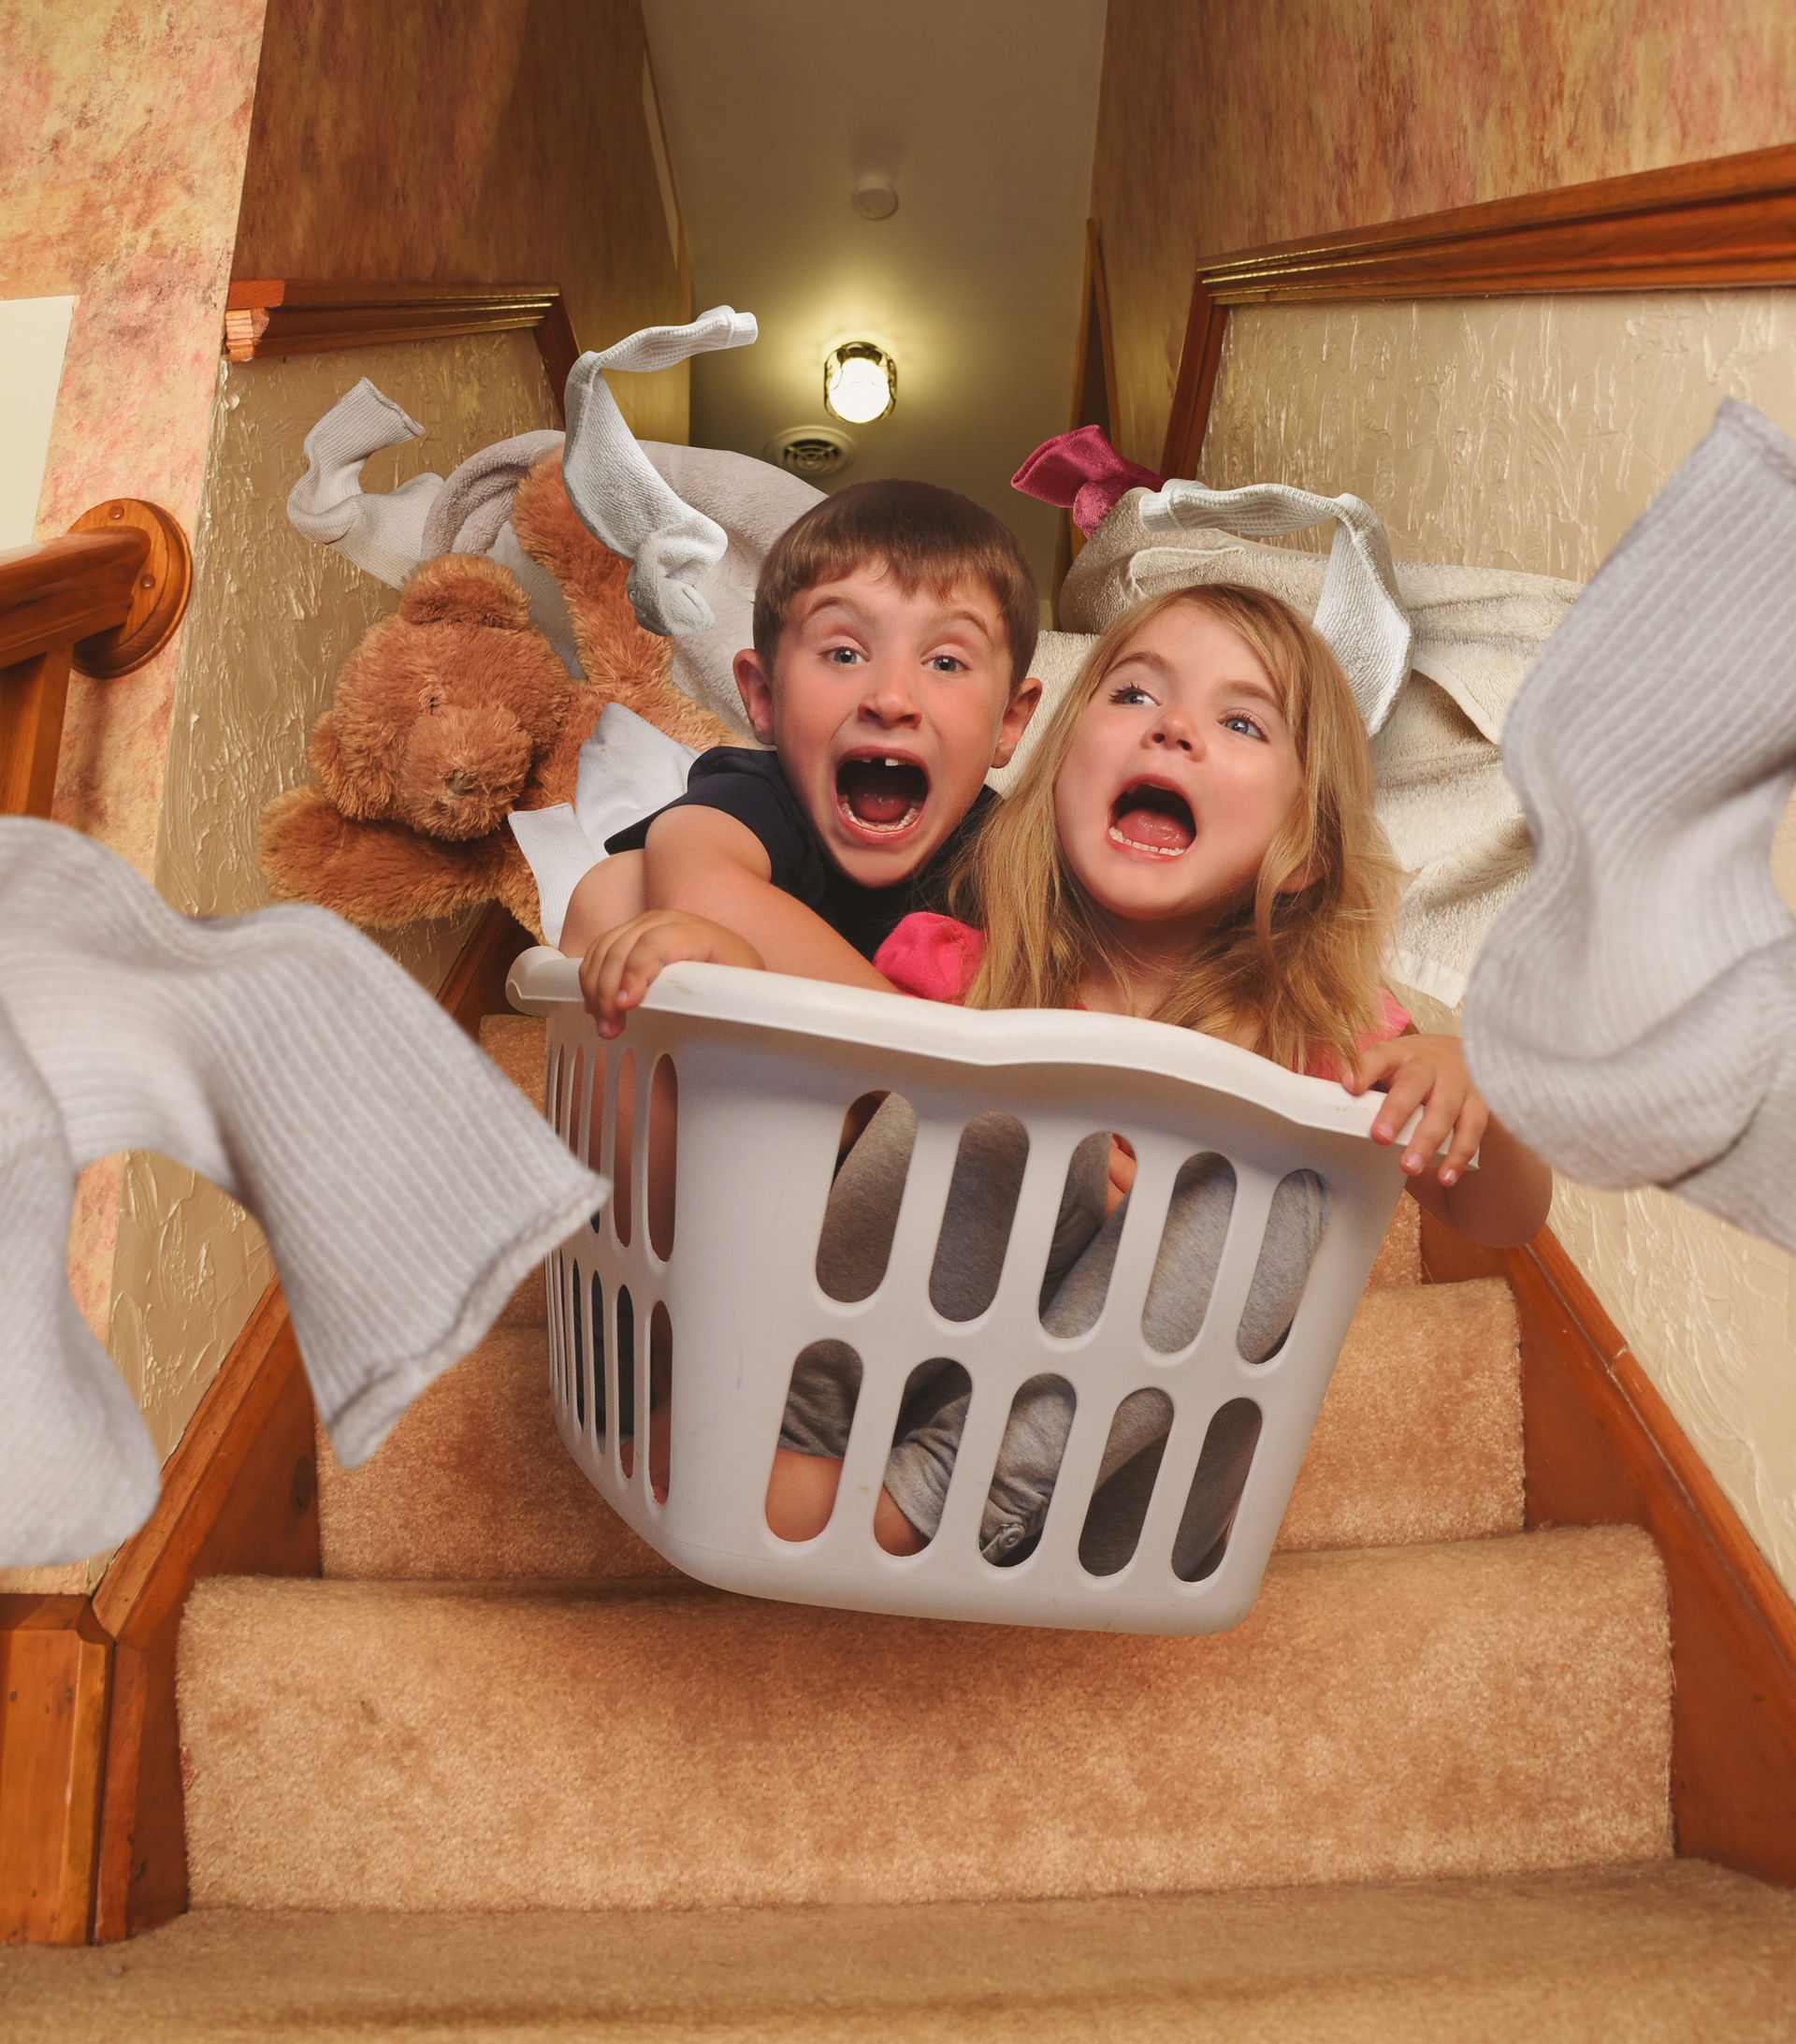 45151048 - two young children are riding in a laundrey basket down the house stairs with socks flying for a parenting, babysitter or humor concept.